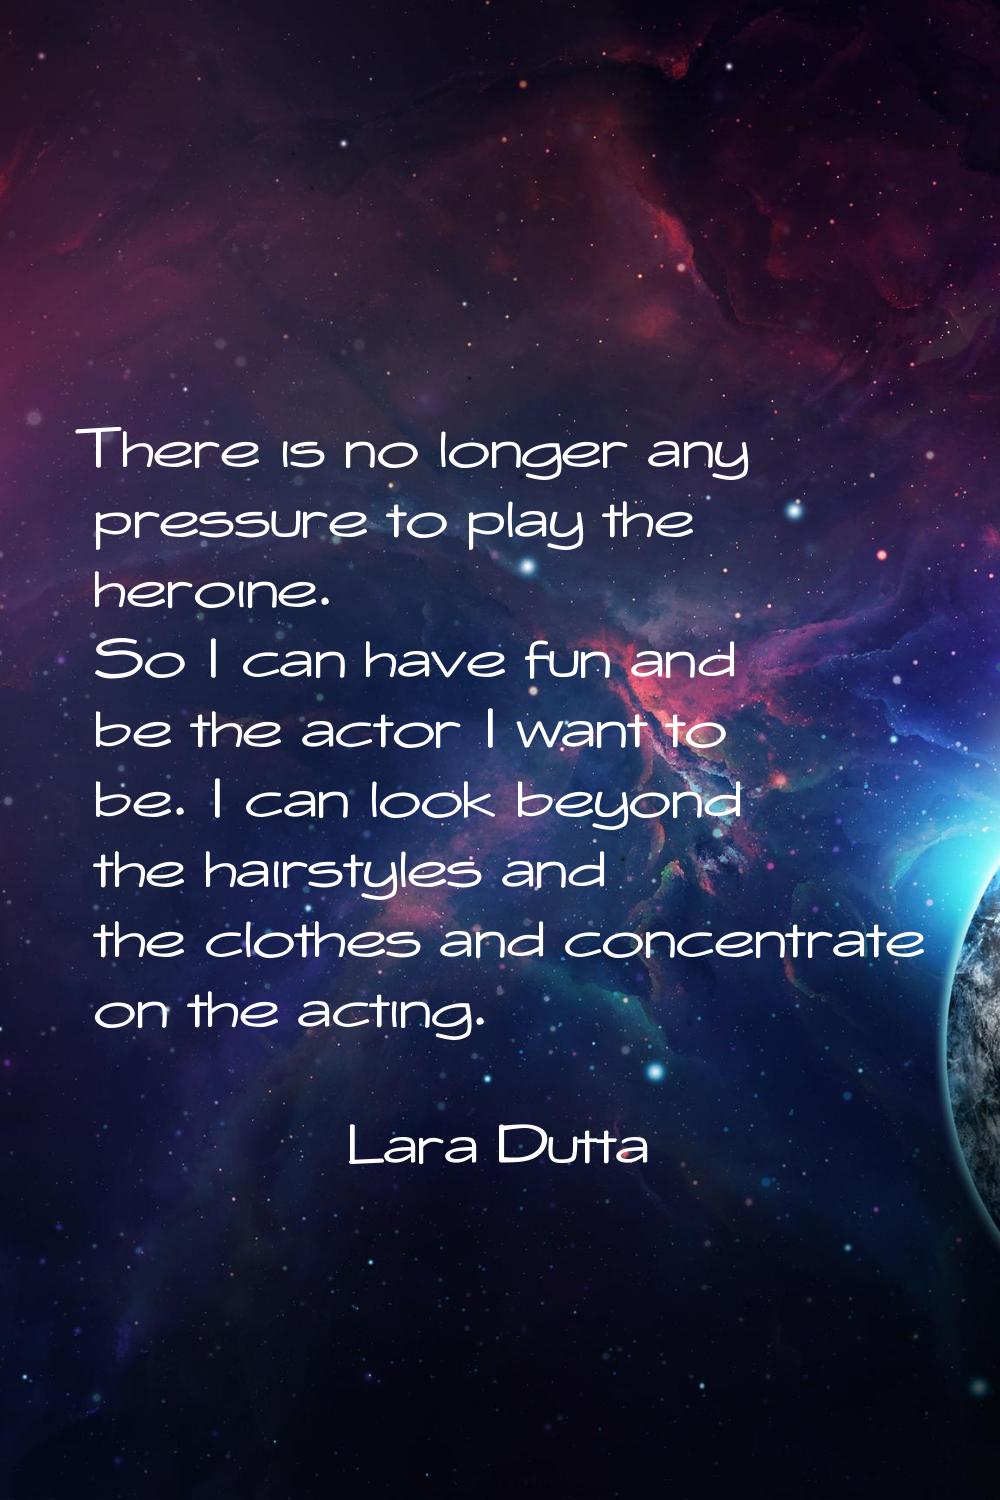 There is no longer any pressure to play the heroine. So I can have fun and be the actor I want to b